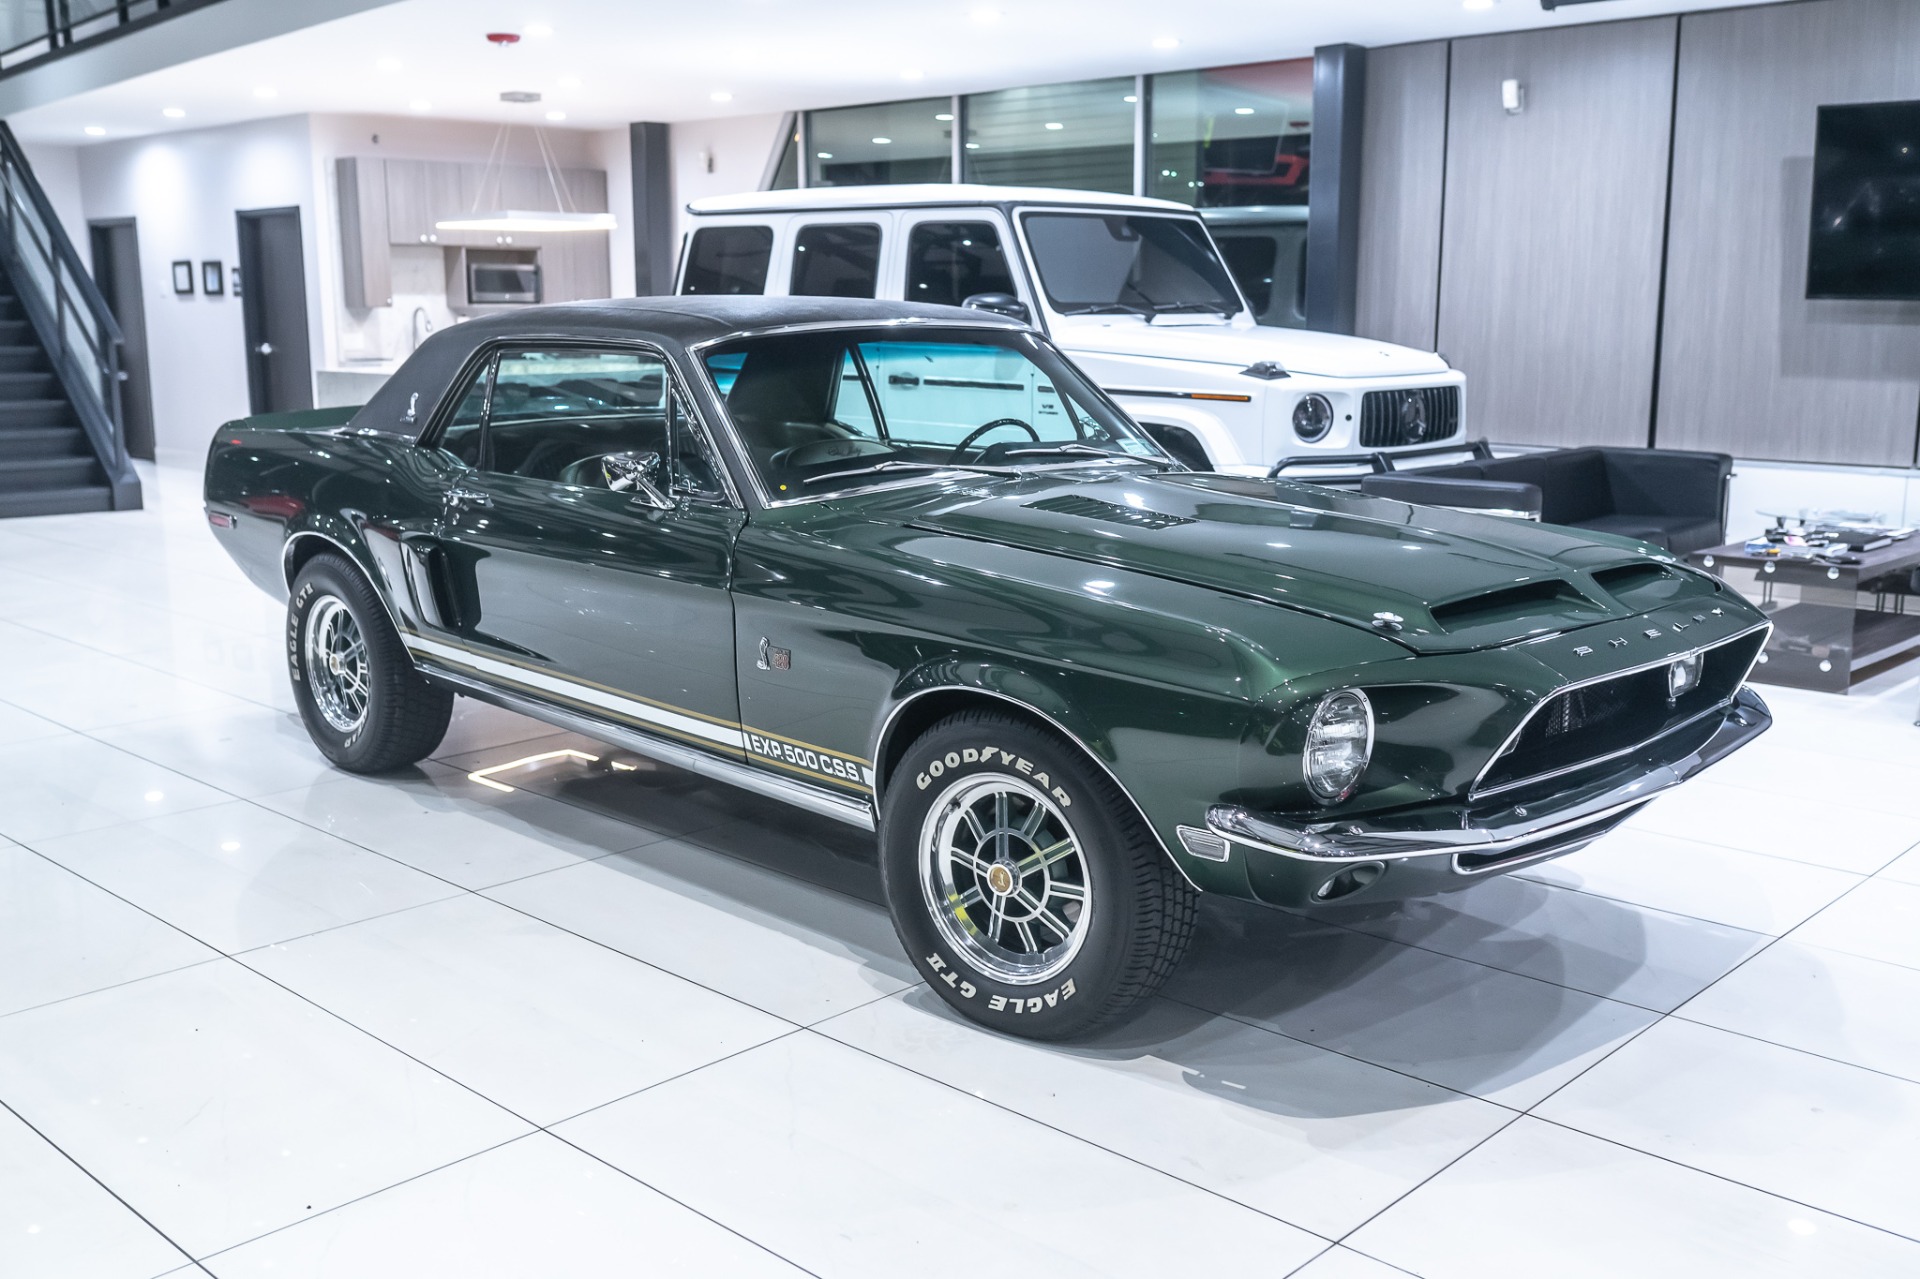 Used-1968-Ford-Shelby-Mustang-EXP-500-CSS-Coupe-GREEN-HORNET-1-OF-1-Ever-Built-By-Carroll-Shelby